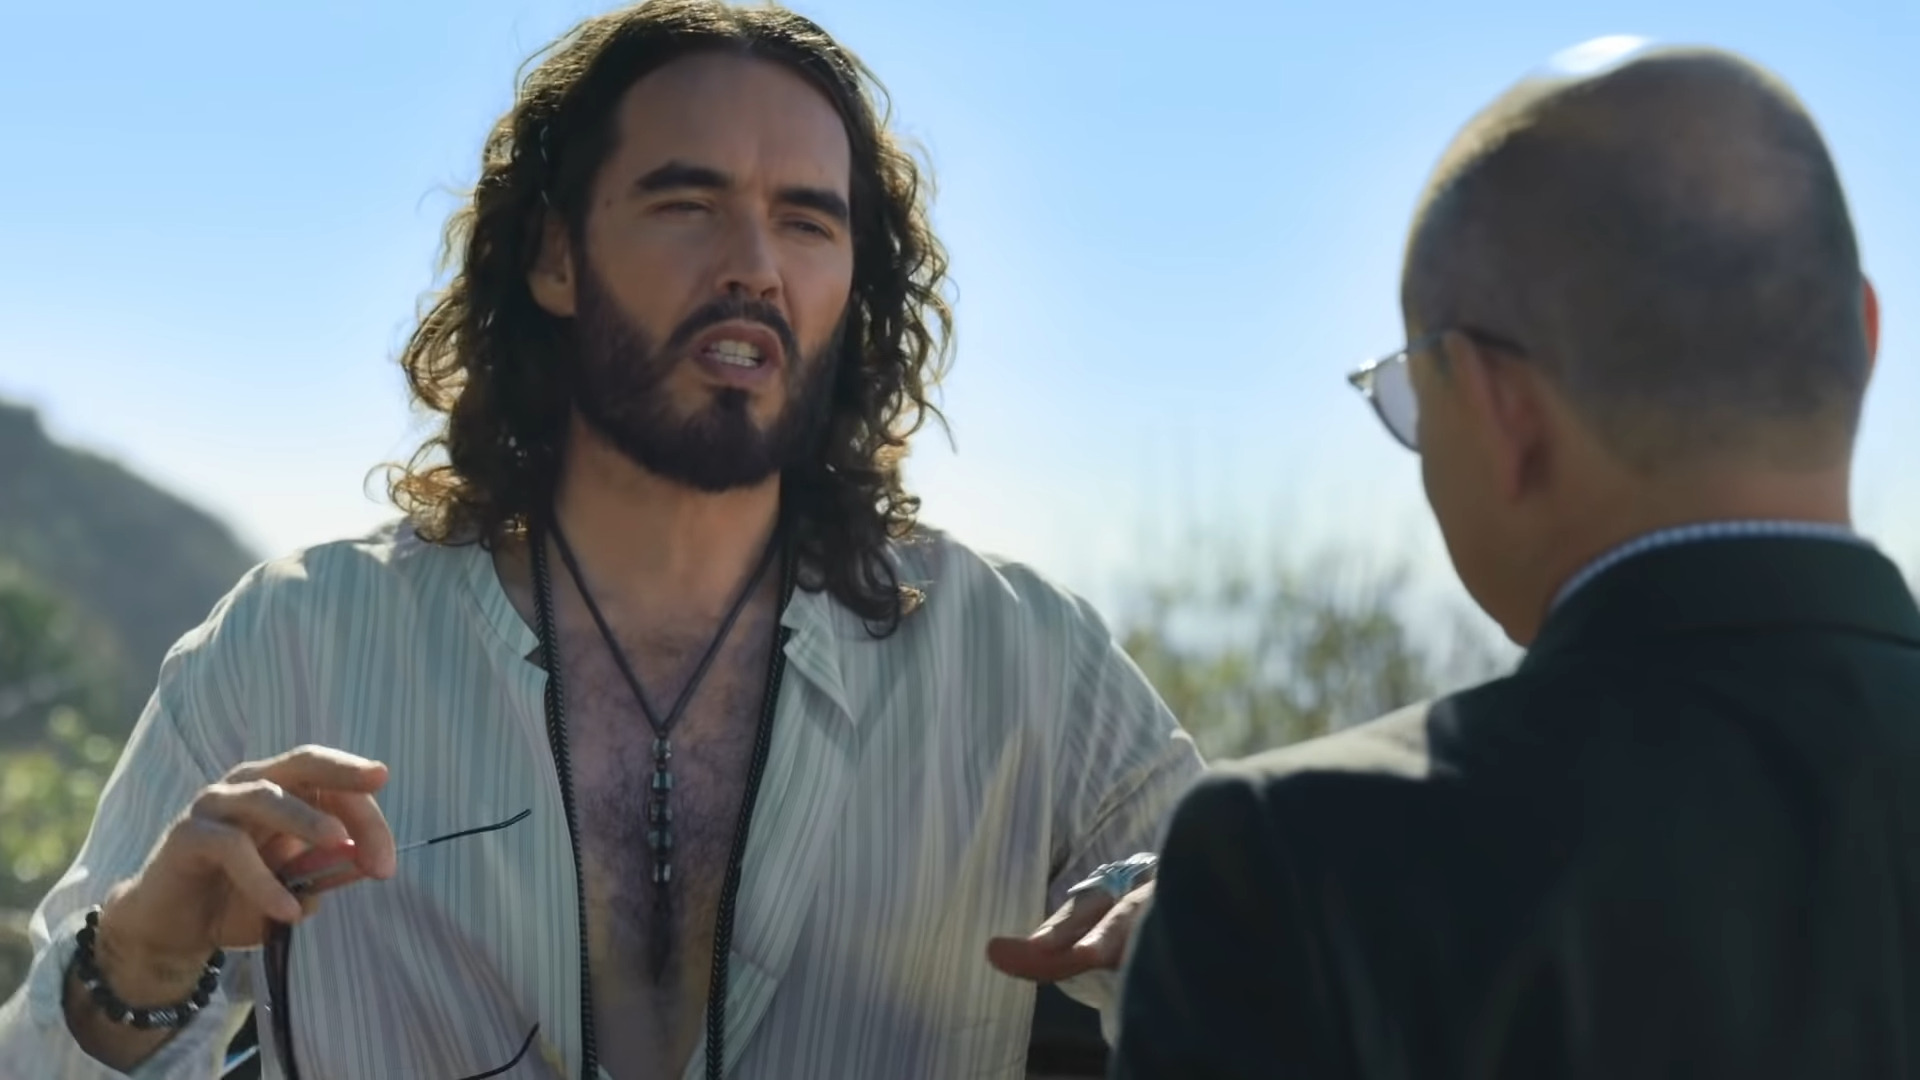 Lance (Russell Brand) clears the air with Joe (Rob Corddry) in Ballers Season 4 Episode 5 "Doink" (2018), HBO